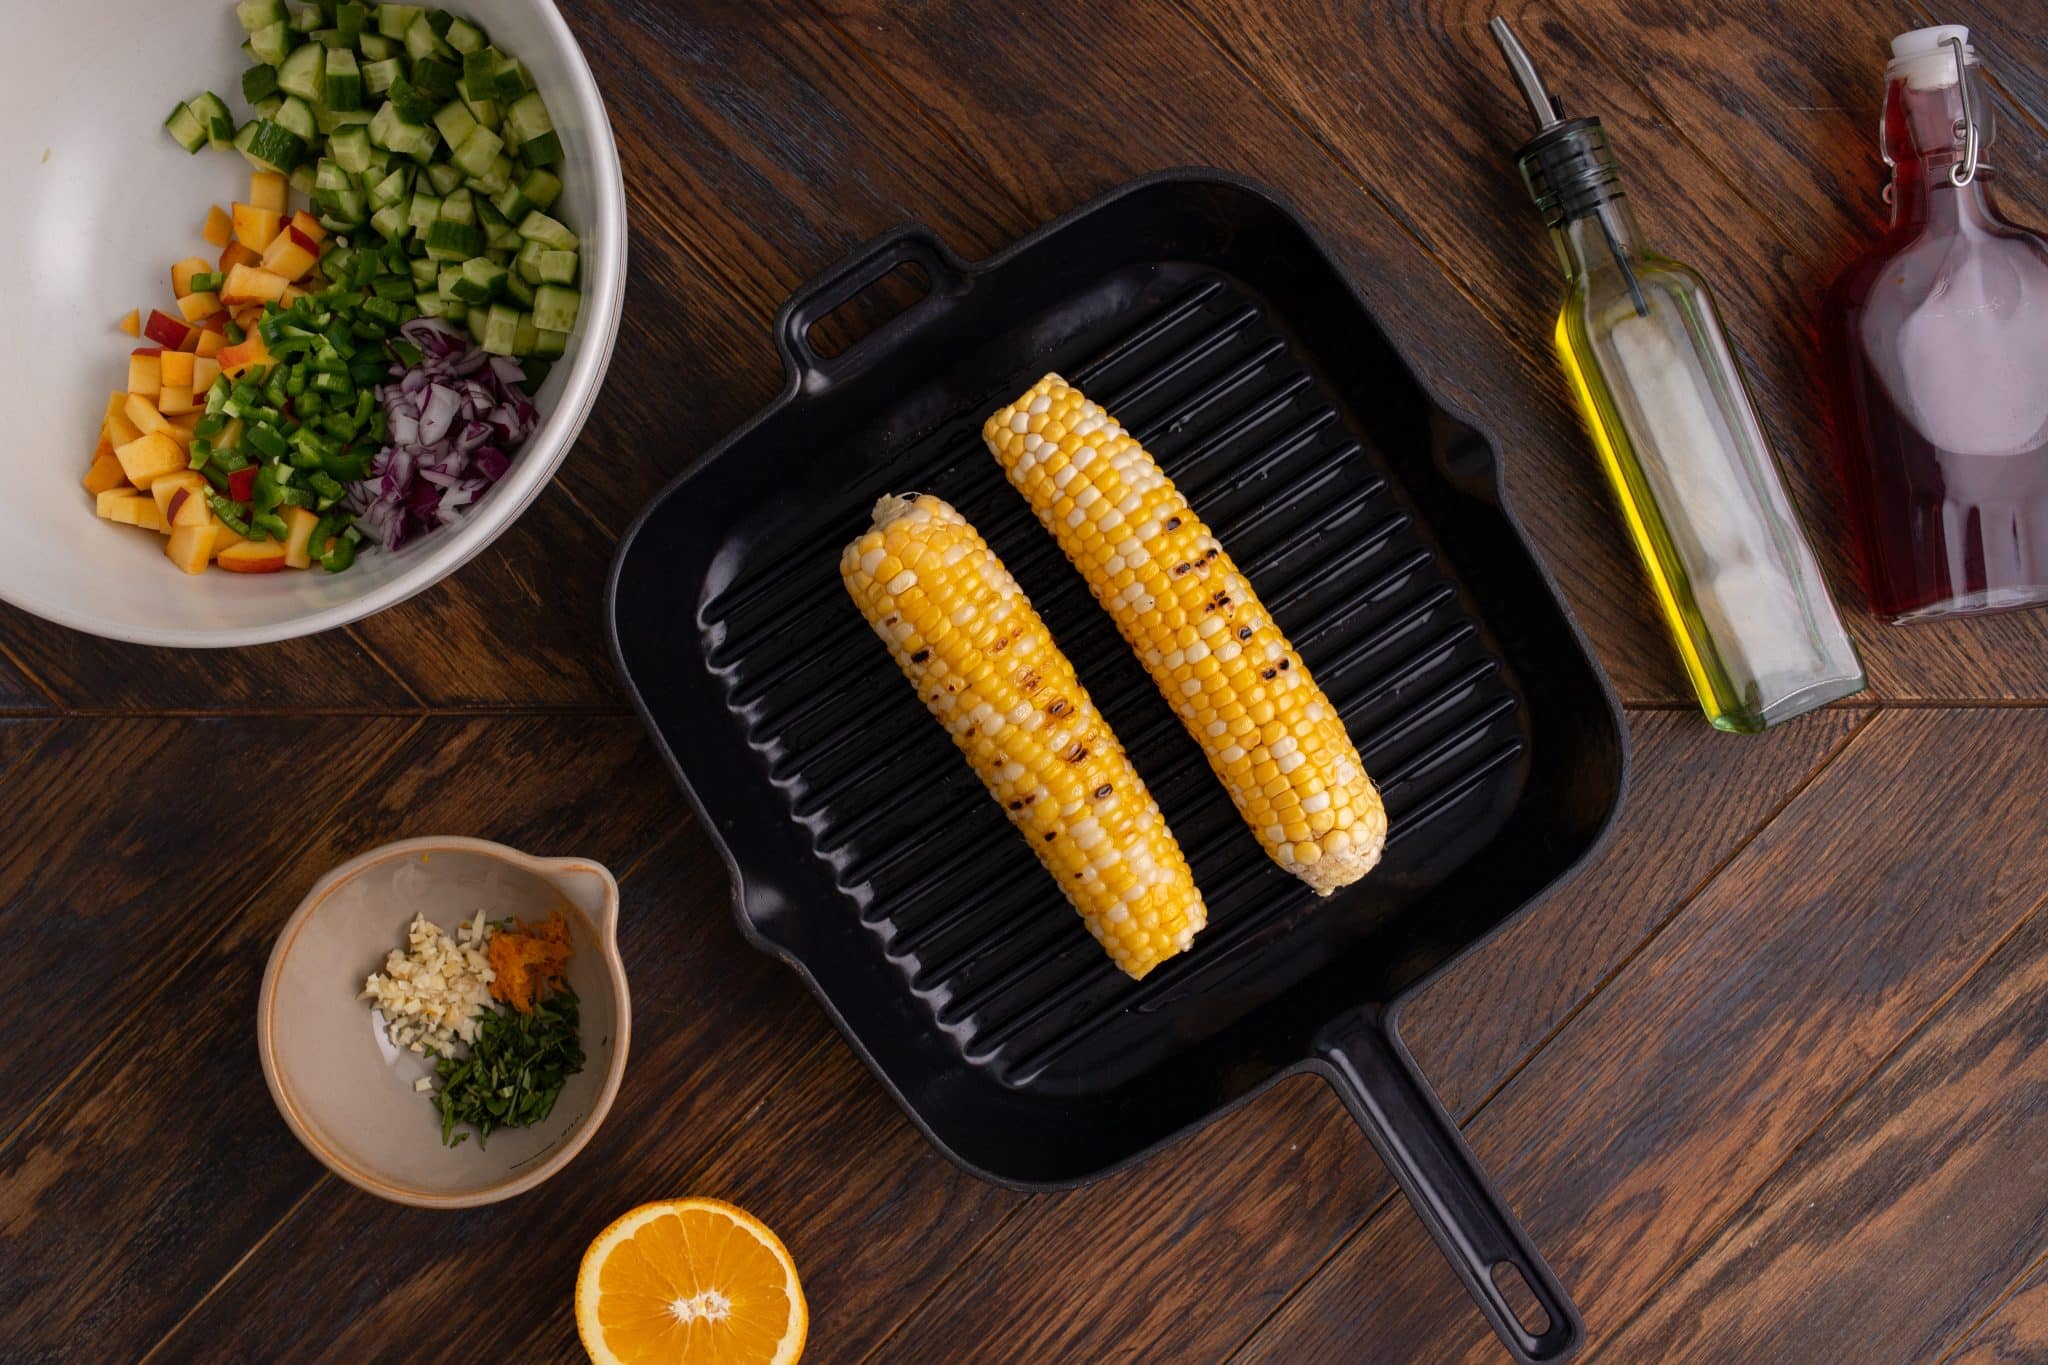 Two grilled corn cobs in a grill pan surrounded by a bowl of chopped vegetables, a small bowl of chopped garlic and herbs, a halved orange, a bottle of olive oil, and a bottle of sauce on a wooden table.